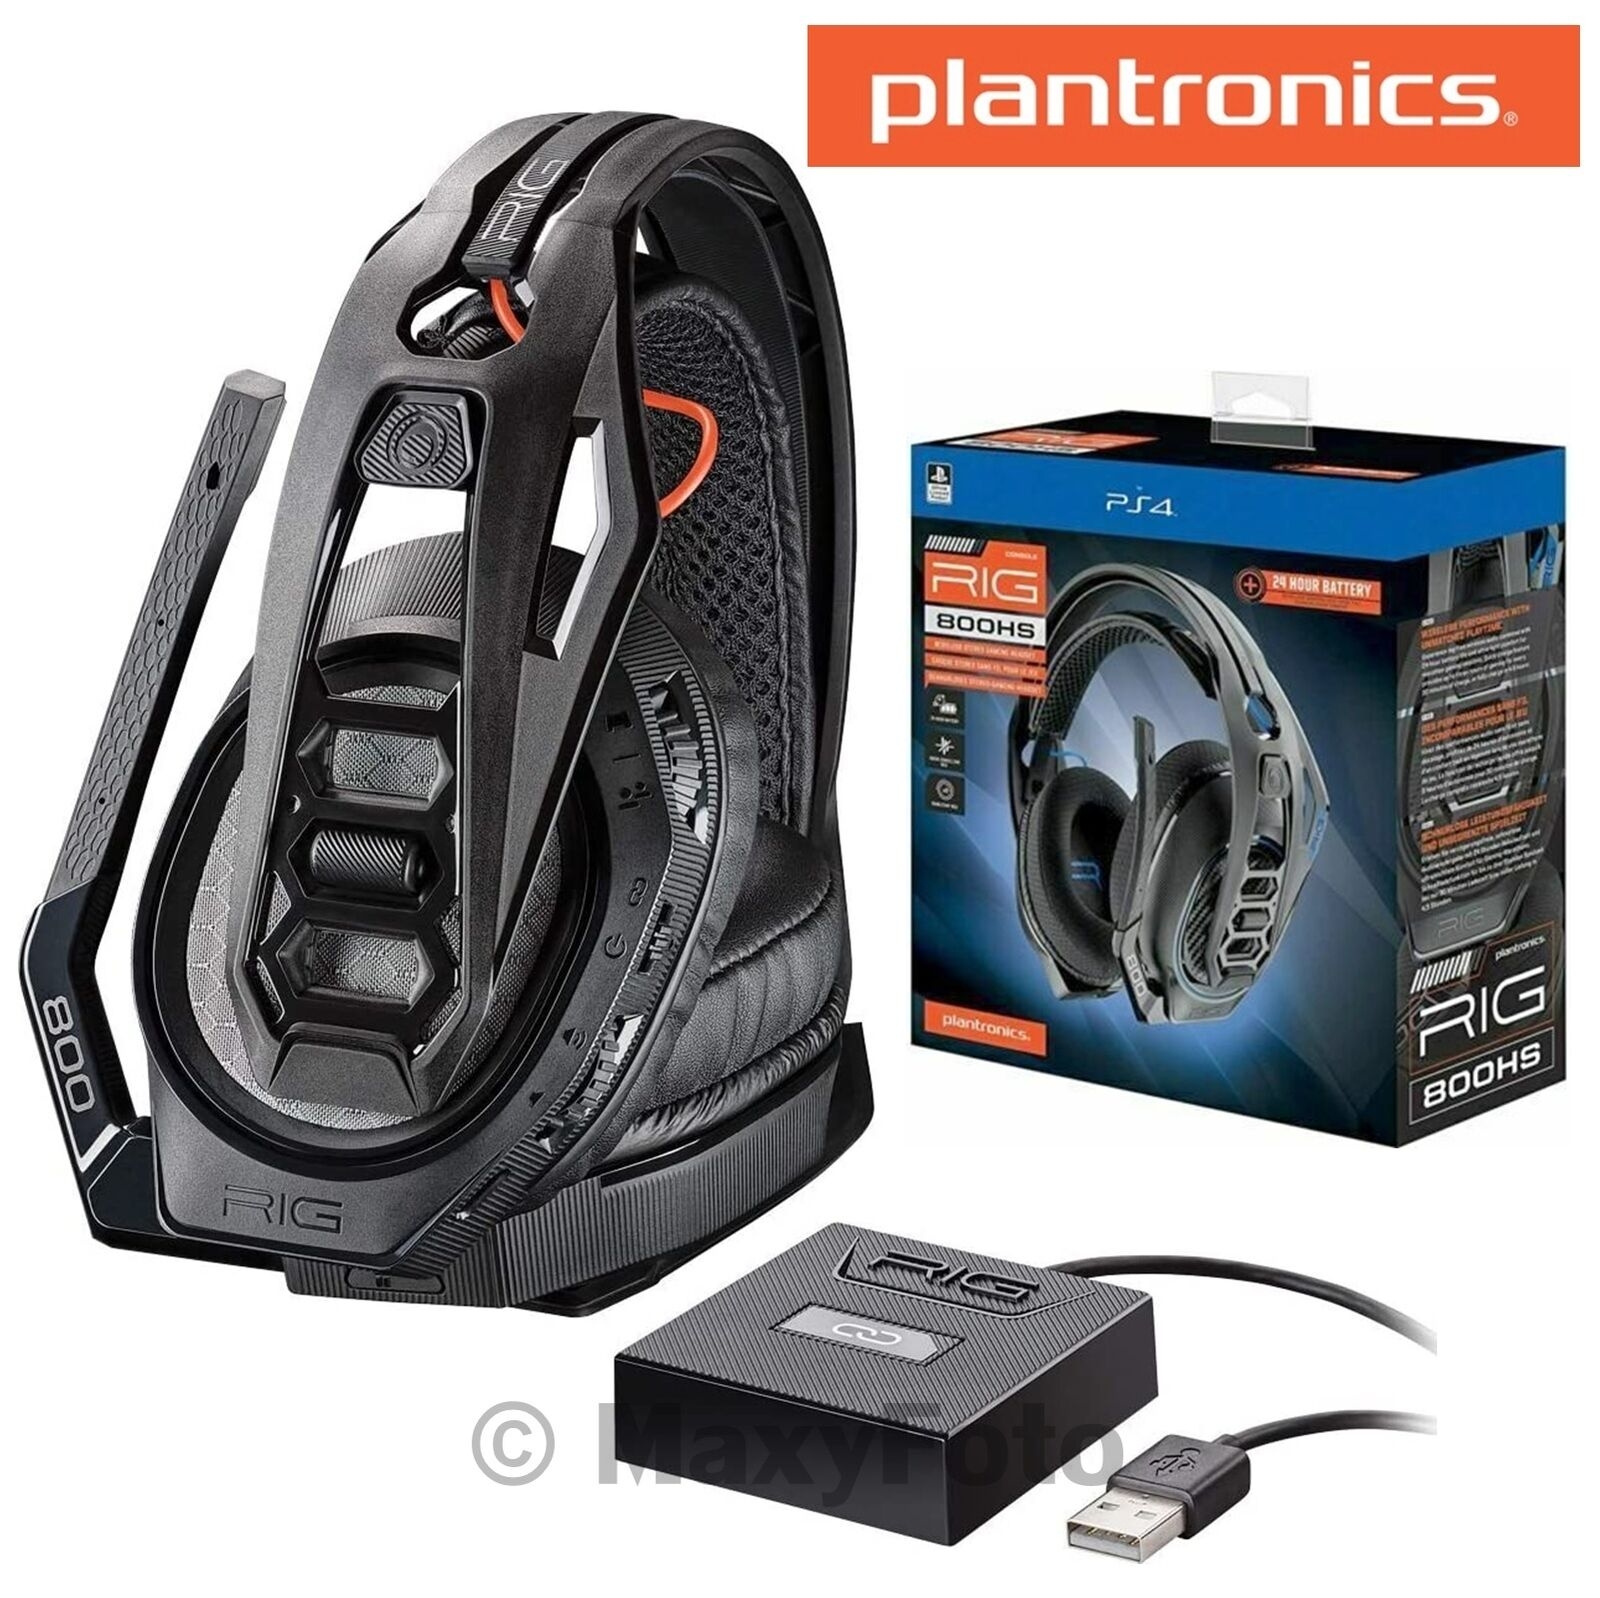 Plantronics Cuffie Rig 800hs Ps4 Playstation 4